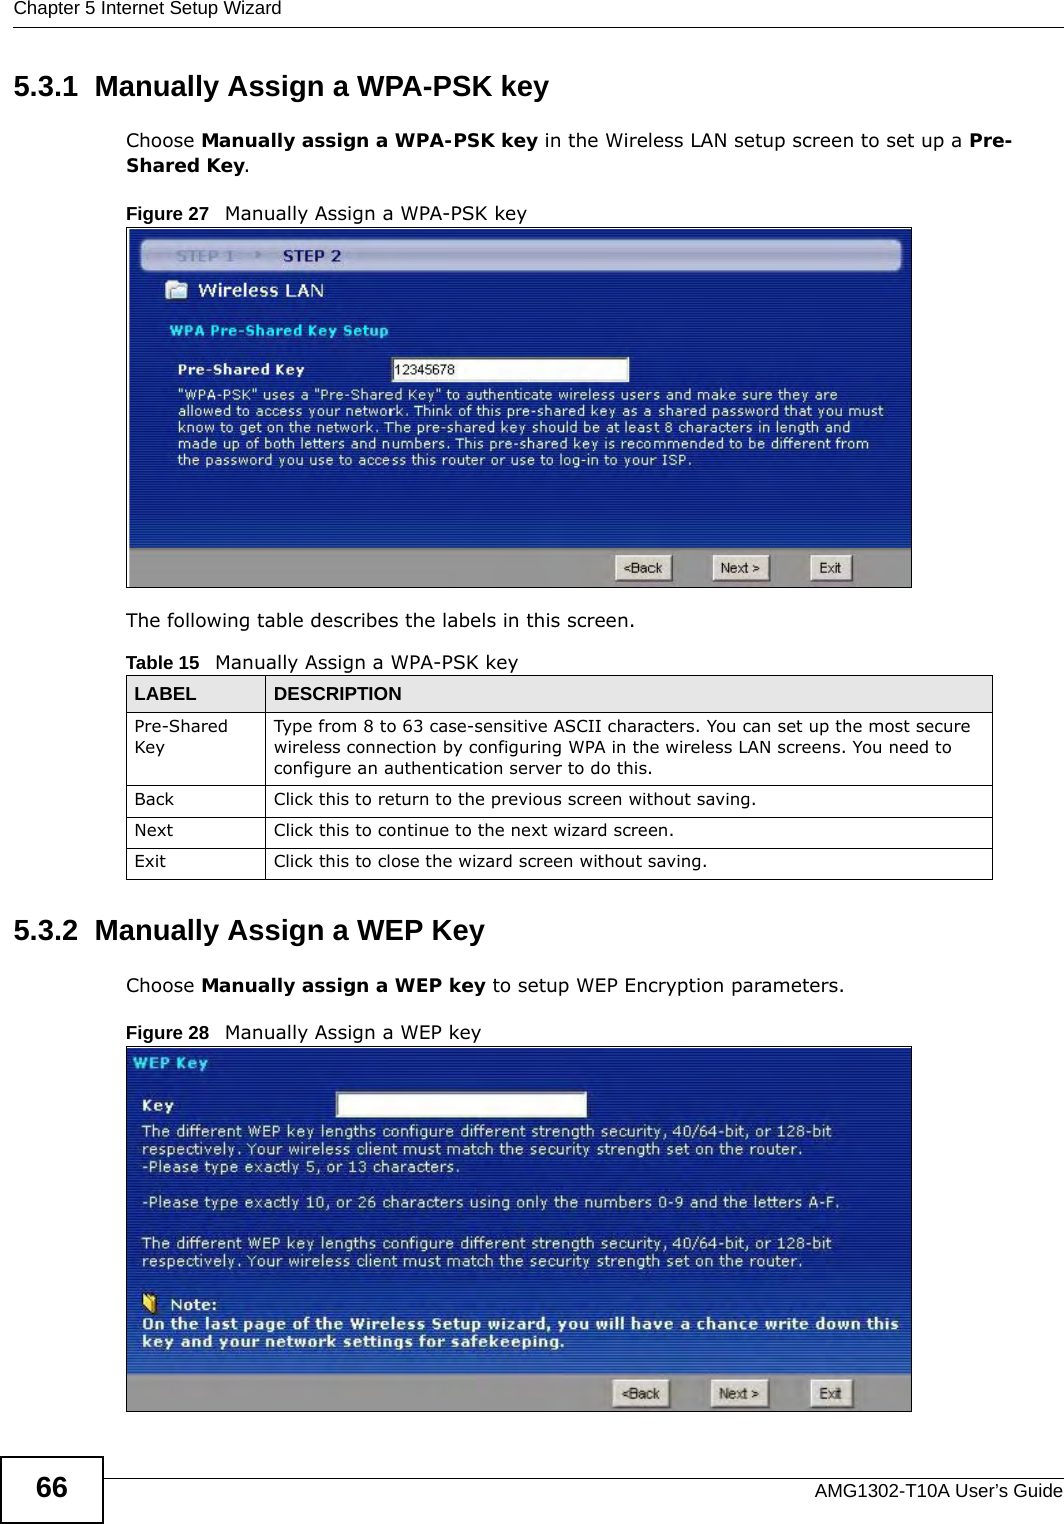 Chapter 5 Internet Setup WizardAMG1302-T10A User’s Guide665.3.1  Manually Assign a WPA-PSK keyChoose Manually assign a WPA-PSK key in the Wireless LAN setup screen to set up a Pre-Shared Key.Figure 27   Manually Assign a WPA-PSK keyThe following table describes the labels in this screen. 5.3.2  Manually Assign a WEP KeyChoose Manually assign a WEP key to setup WEP Encryption parameters.Figure 28   Manually Assign a WEP keyTable 15   Manually Assign a WPA-PSK keyLABEL DESCRIPTIONPre-Shared KeyType from 8 to 63 case-sensitive ASCII characters. You can set up the most secure wireless connection by configuring WPA in the wireless LAN screens. You need to configure an authentication server to do this.Back Click this to return to the previous screen without saving.Next Click this to continue to the next wizard screen.Exit Click this to close the wizard screen without saving.